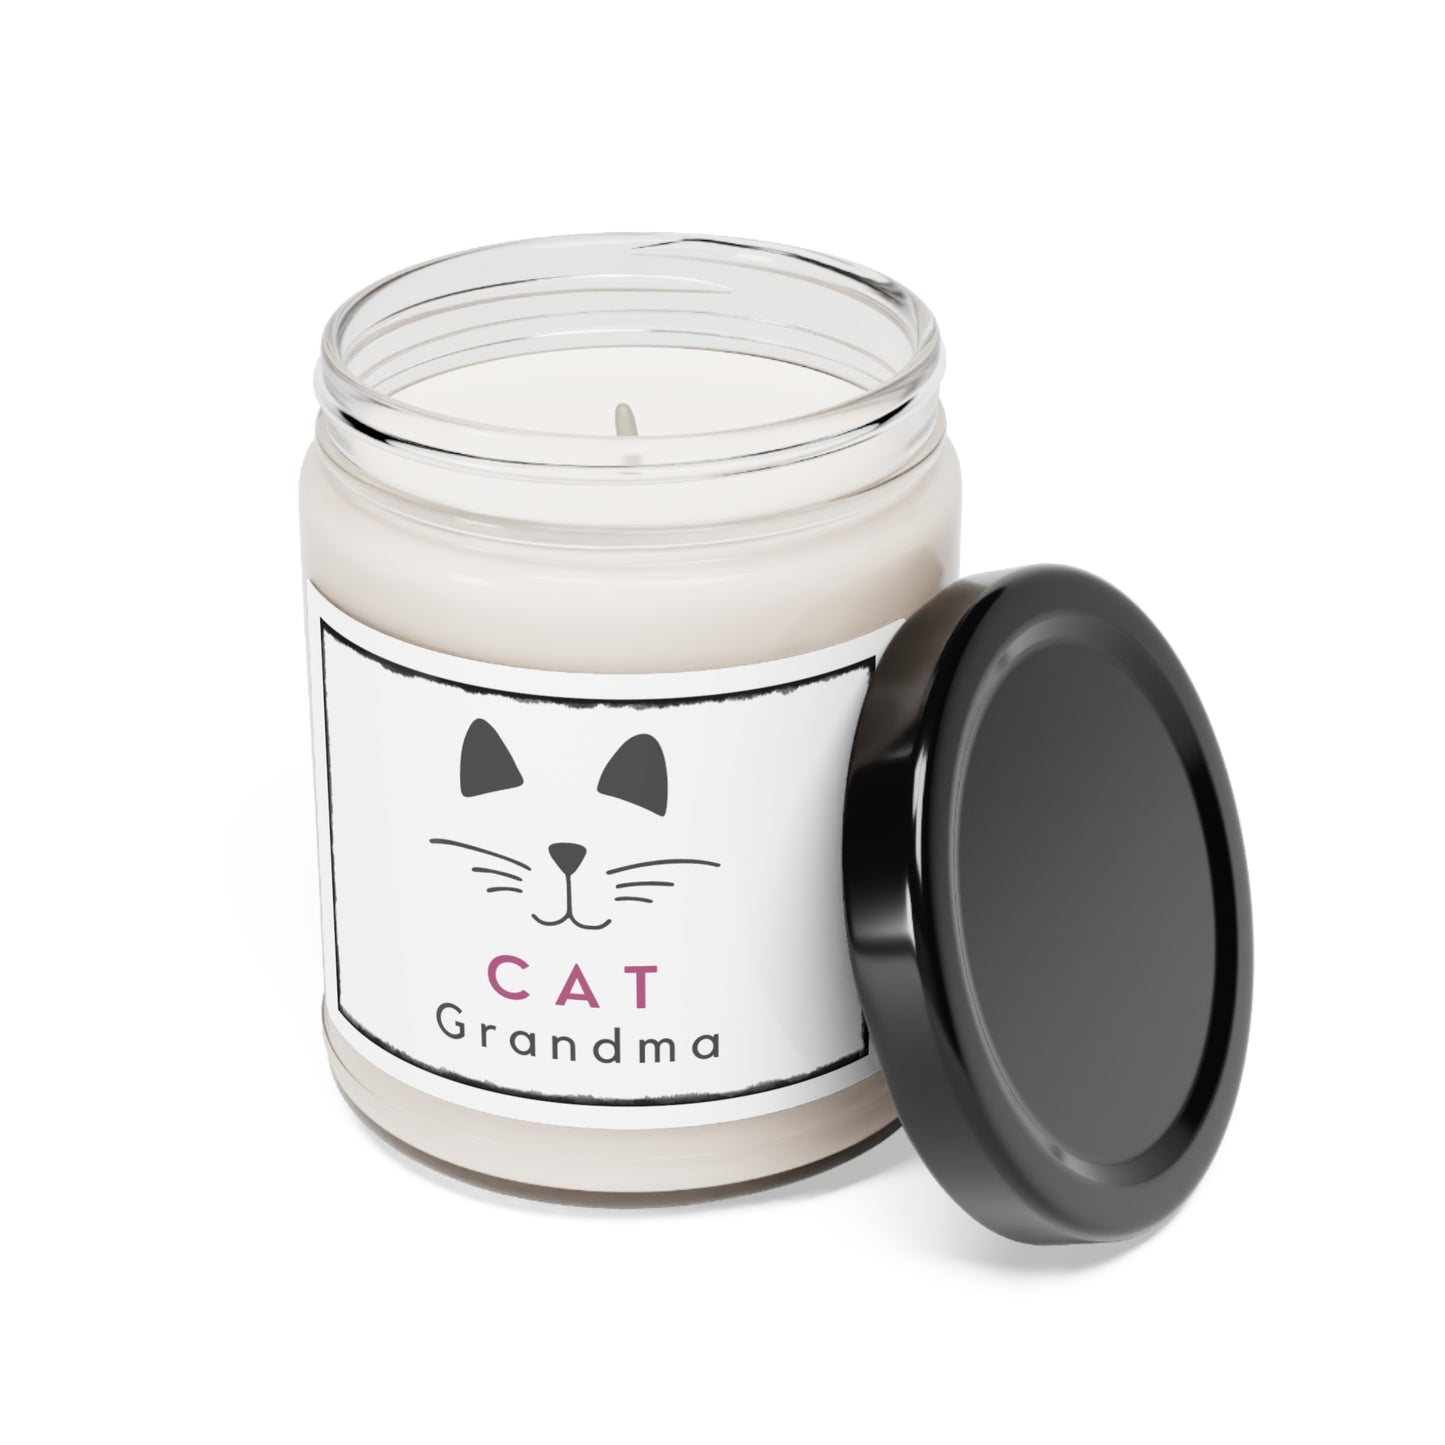 Cat Grandma Scented Soy Candle